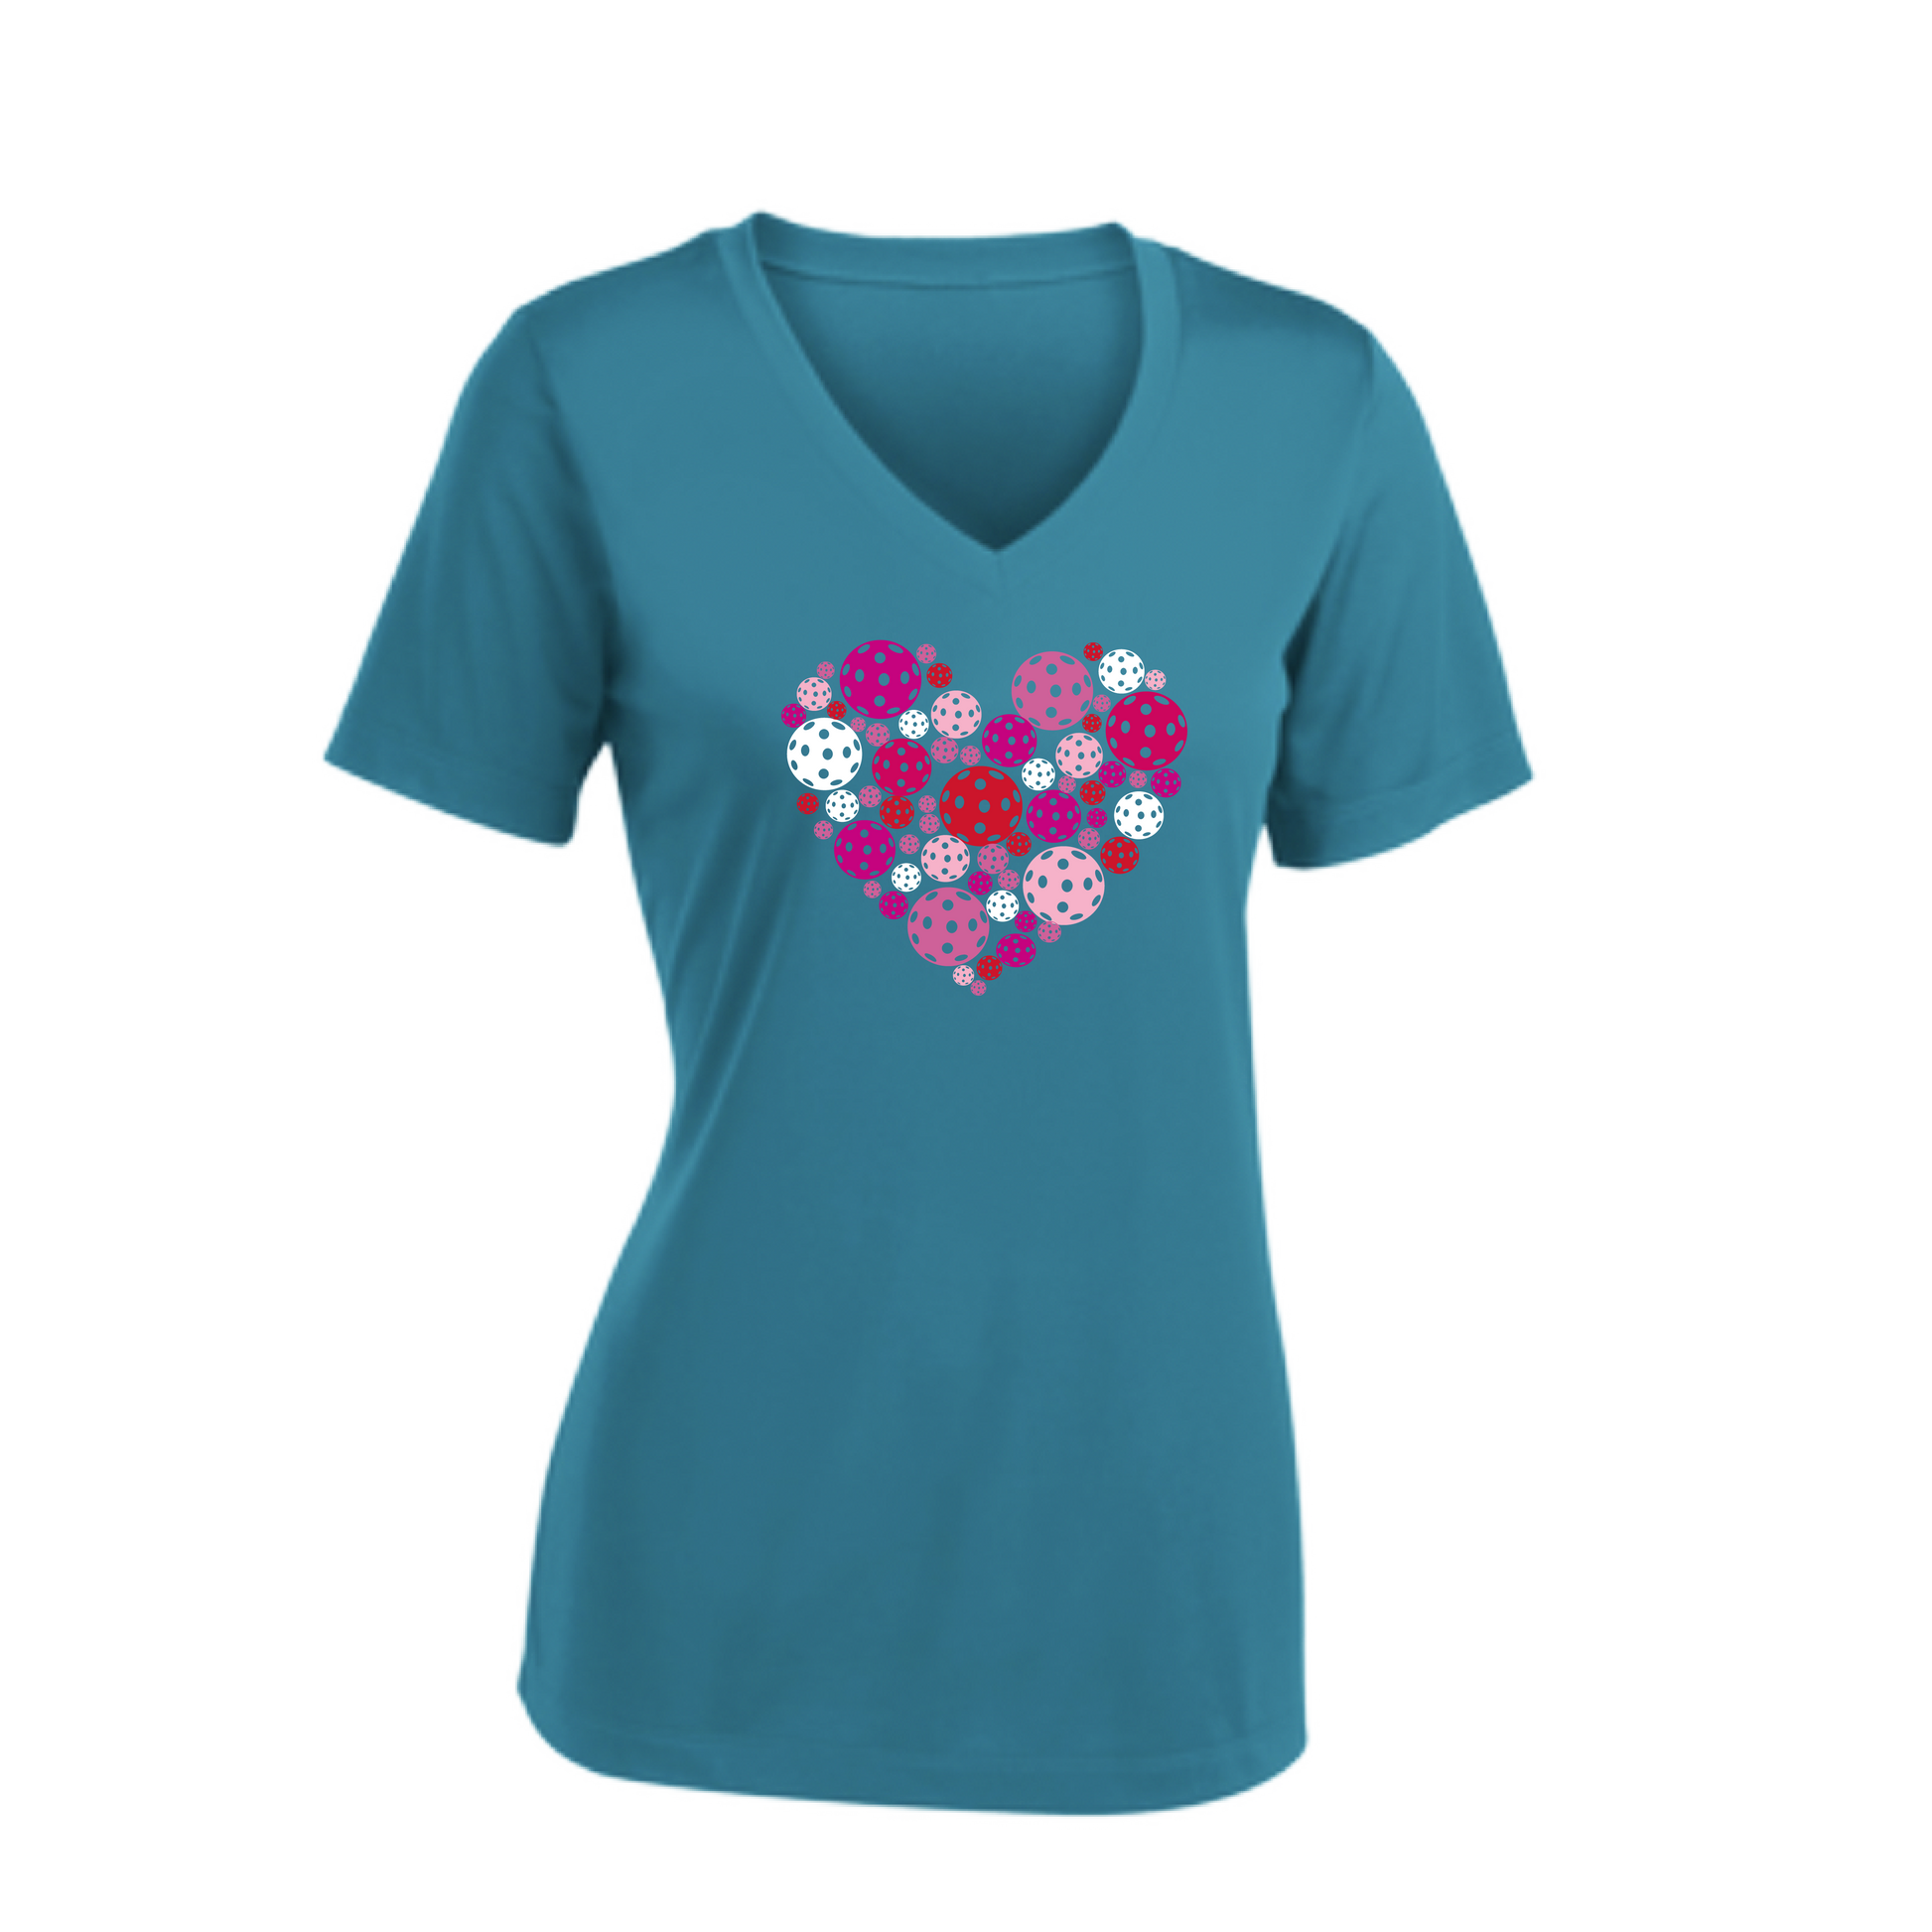 This women's pickleball shirt offers a combination of superior softness and style. The ultra-comfortable material wicks away moisture, features a tri-blend softness, and is equipped with PosiCharge technology that retains color. It's highly breathable and lightweight.